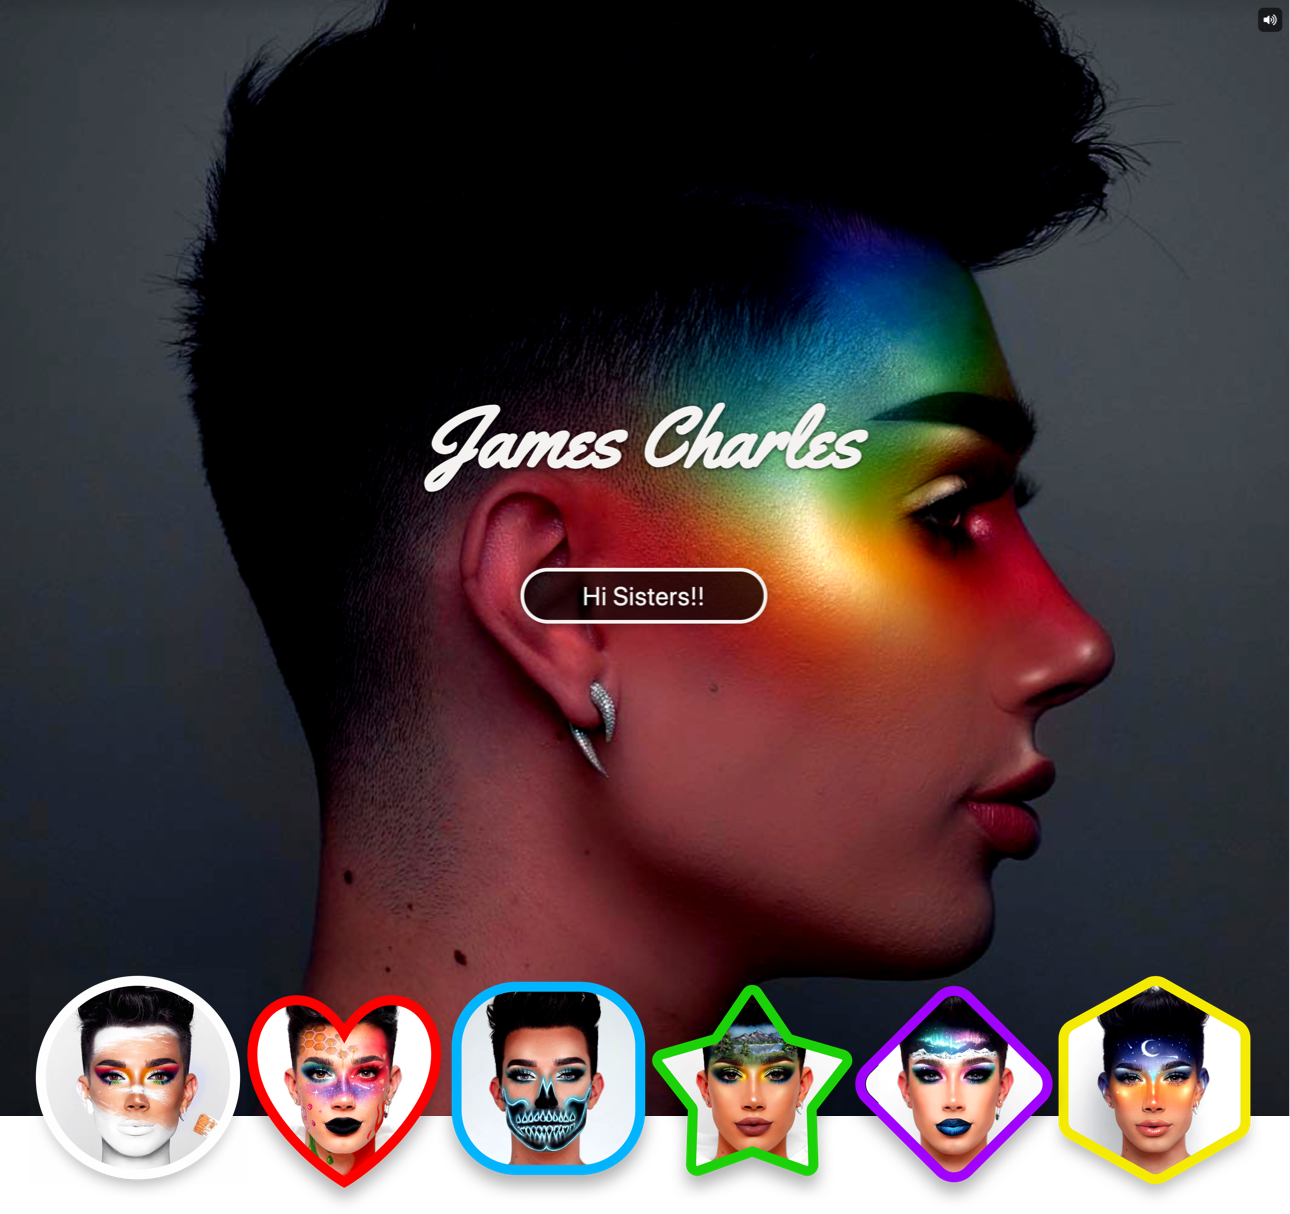 Paul Yanez James Charles Youtube Influencer Brought to life in Games